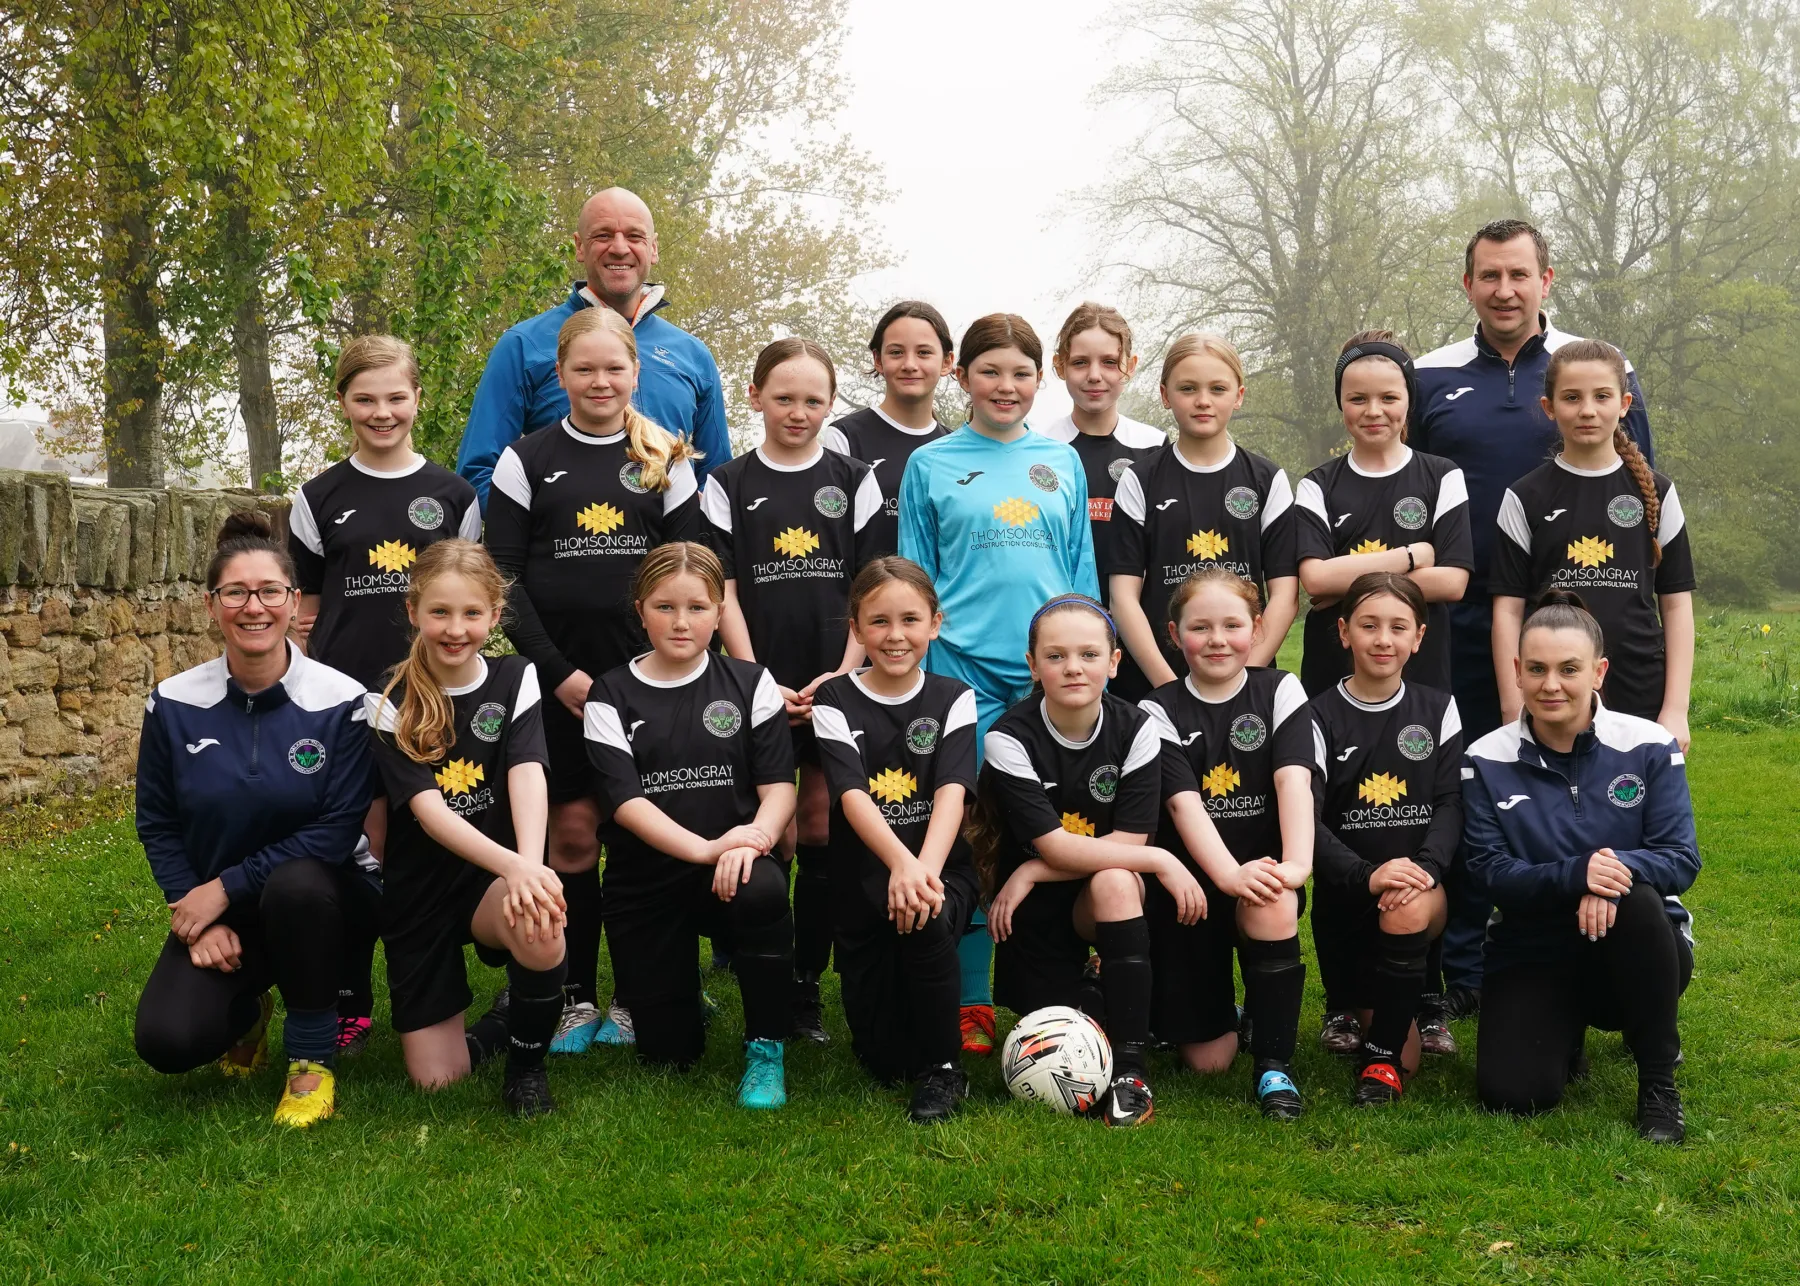 Dalkeith Thistle football team for girls under 12. The team lines up with its coaches and sponsor for a team photo wearing their black strip.